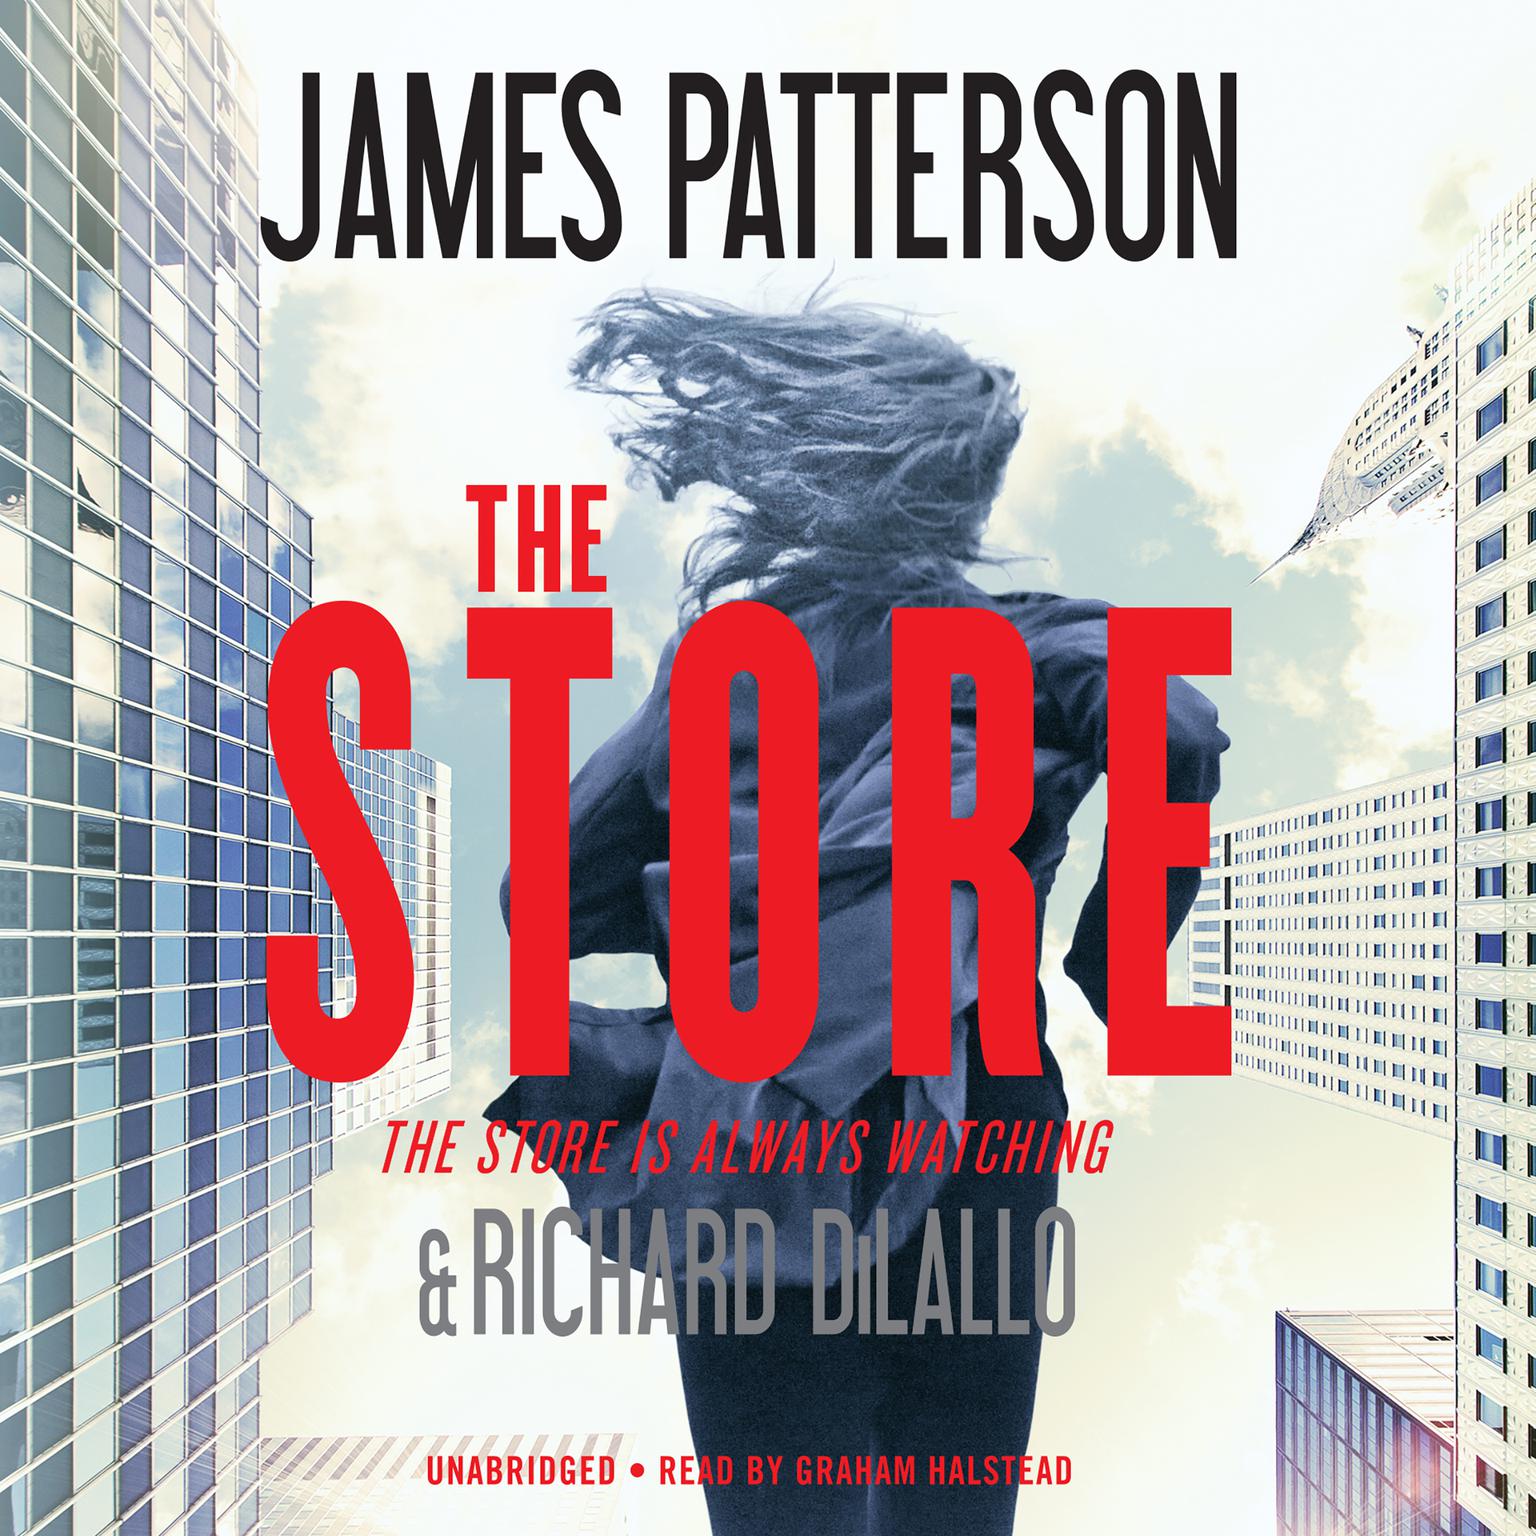 The Store Audiobook, by James Patterson